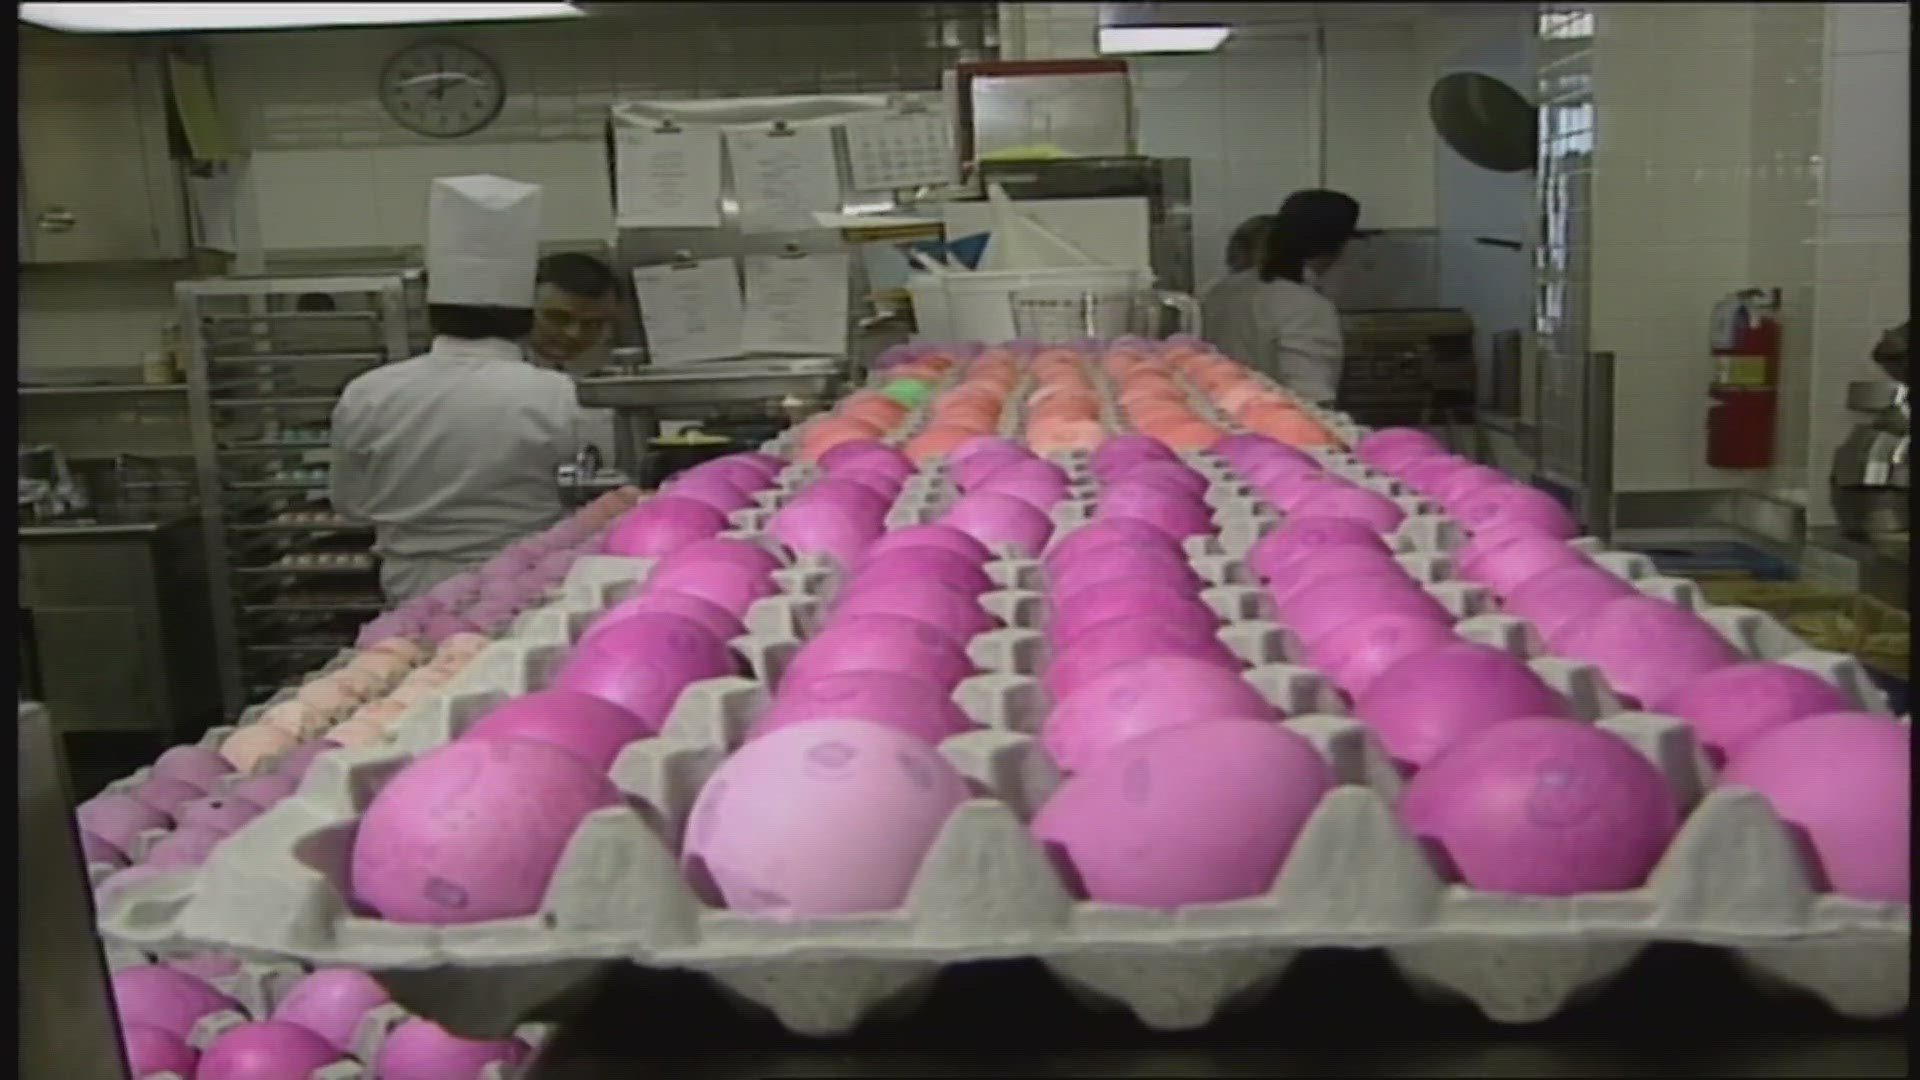 If you plan on dying some eggs for the holiday be prepared to pay more this year.